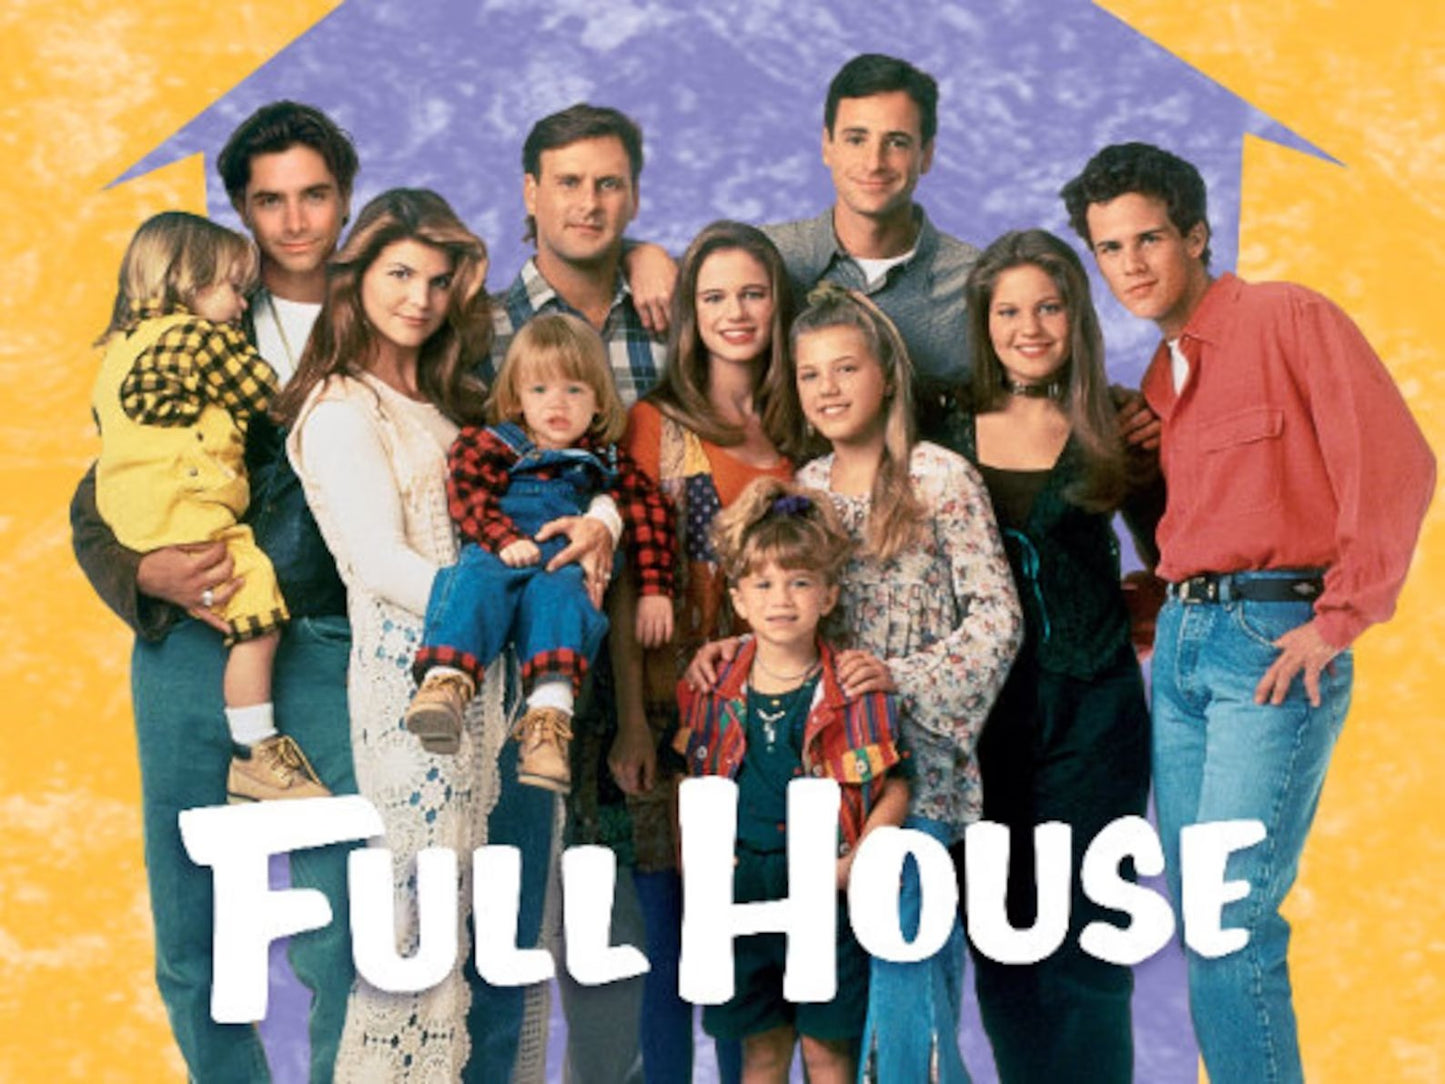 Full House Complete Series in USB Drive - Full HD 1080p All 8 Seasons - Retro TV Series Collection - Turkish TV Series